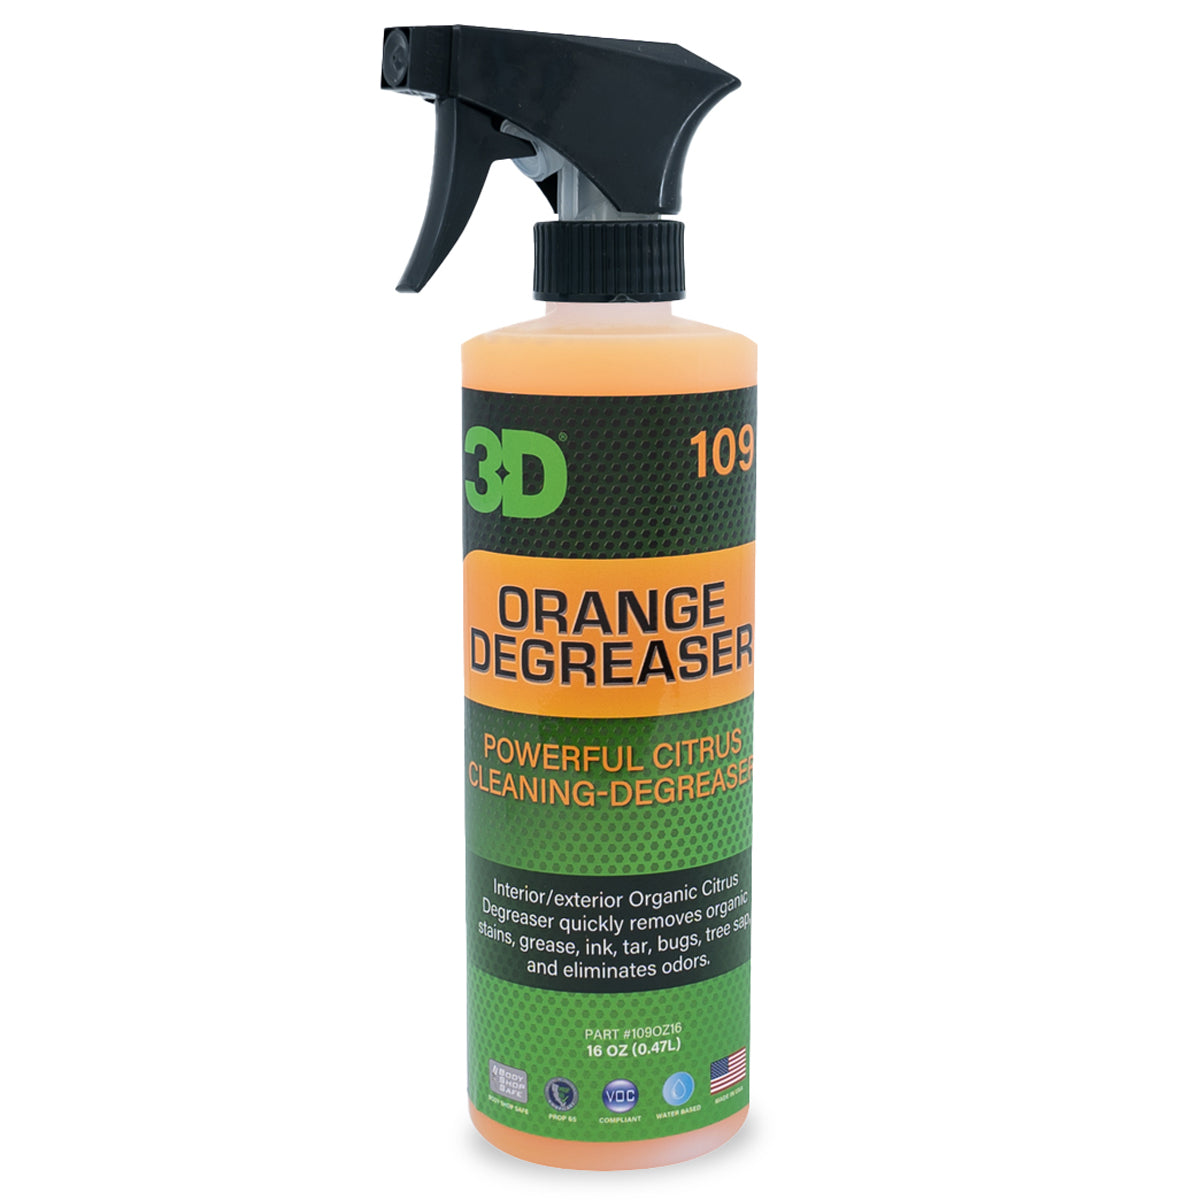 Orange Degreaser Citrus Cleaner - 1 Gallon by 3D Auto Detailing Products